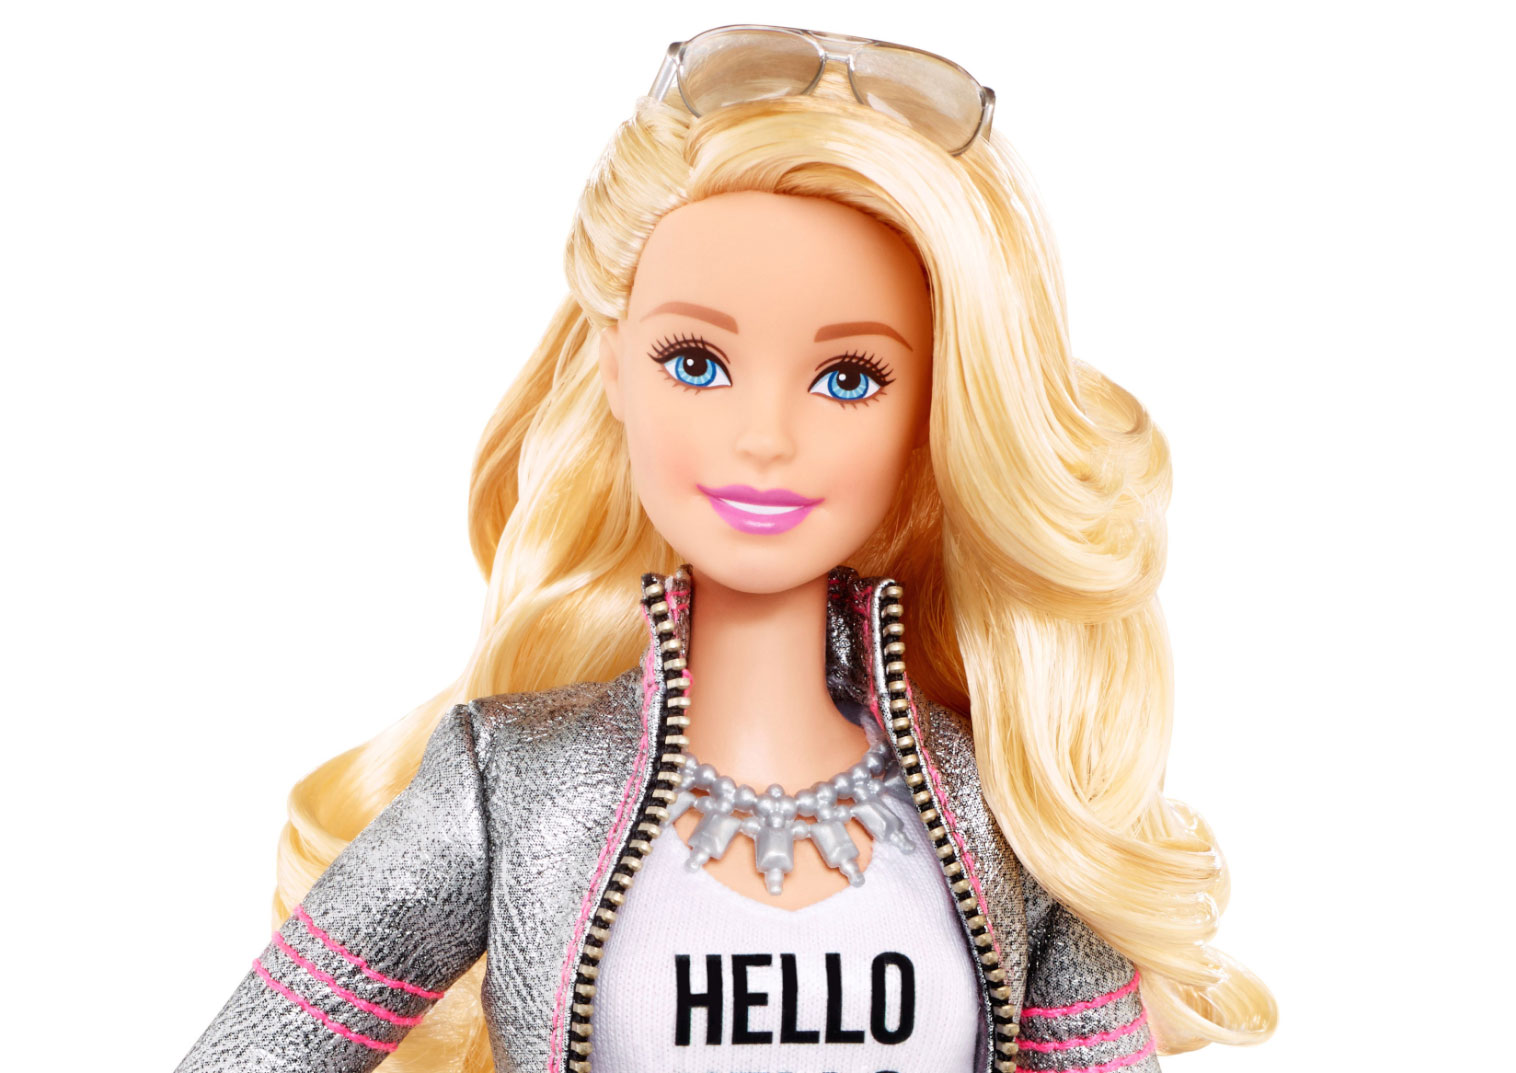 Barbie Learns To Chat Using Artificial Intelligence